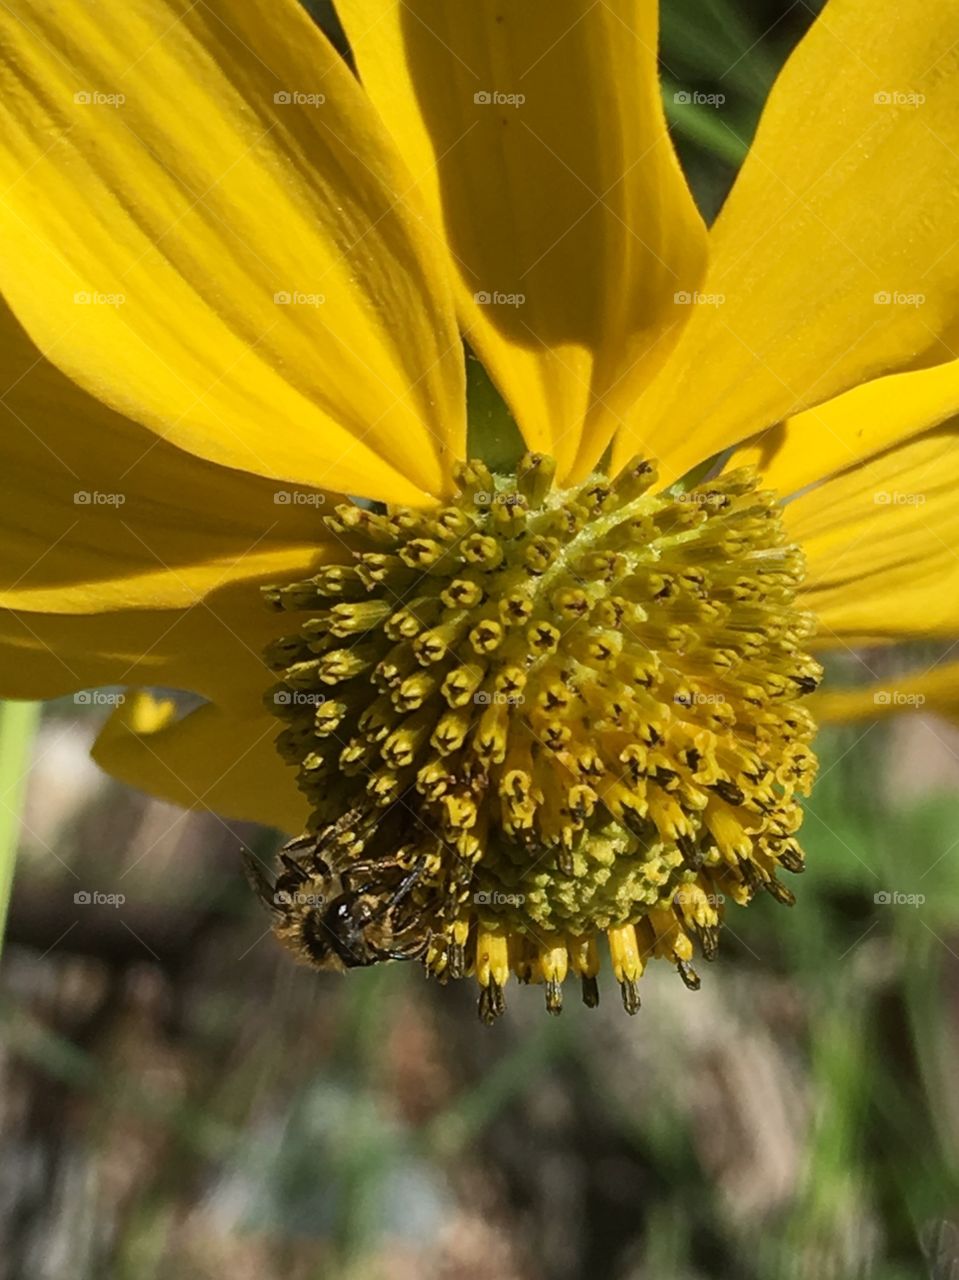 A closeup of a friendly bee visiting a yellow sunflower in the wild garden of nature.